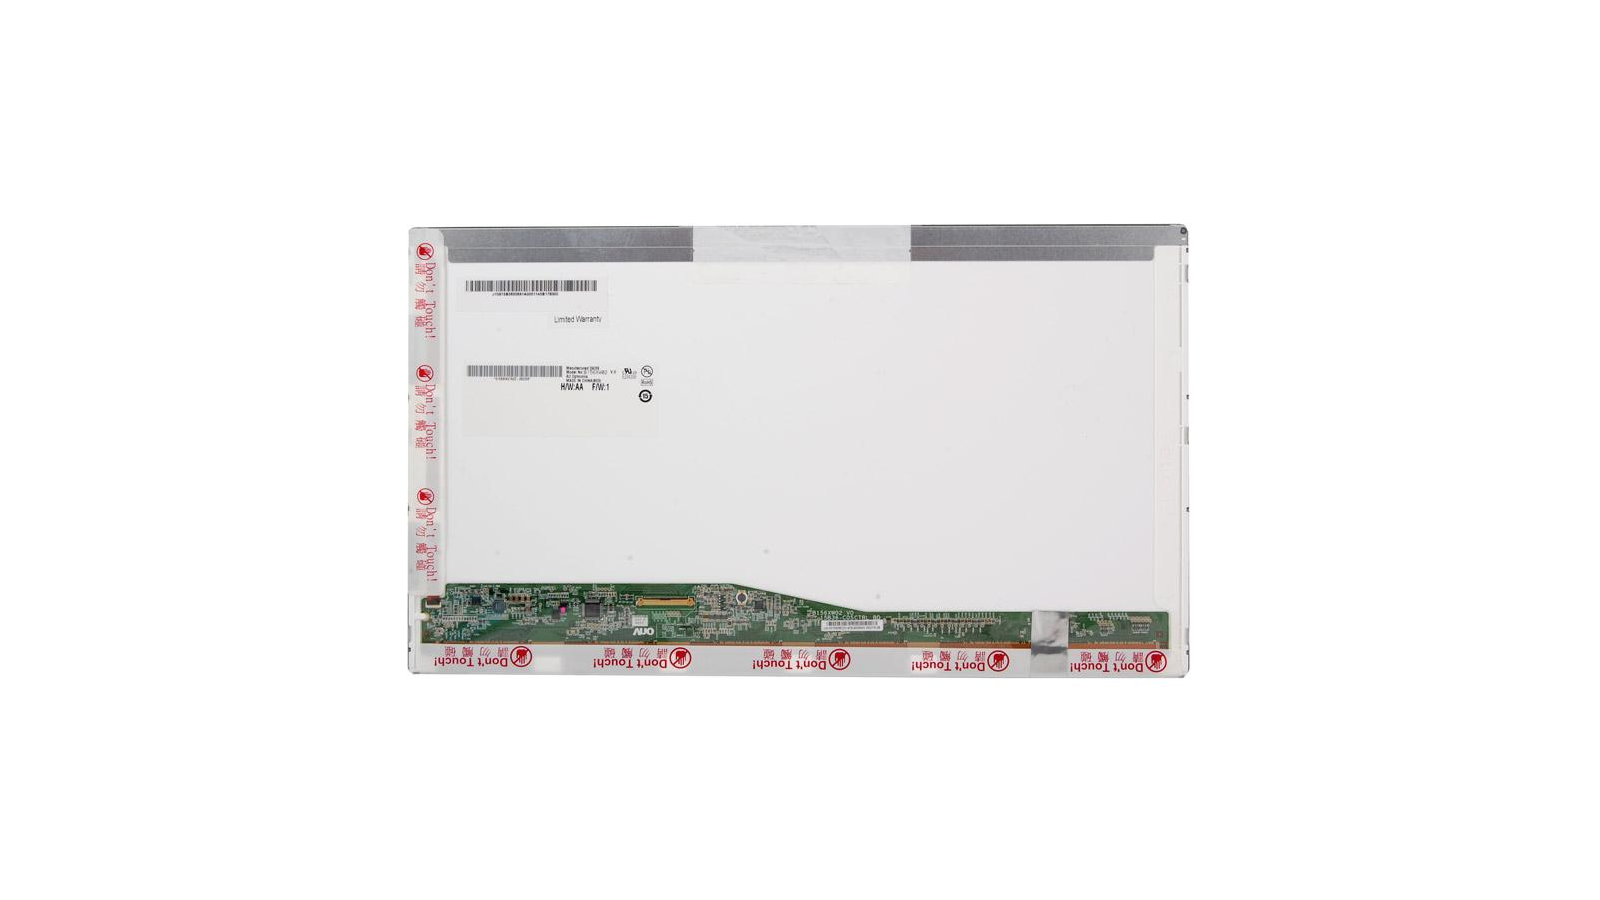 Display LCD Schermo 15,6 LED compatibile con Packard Bell EasyNote MS2266